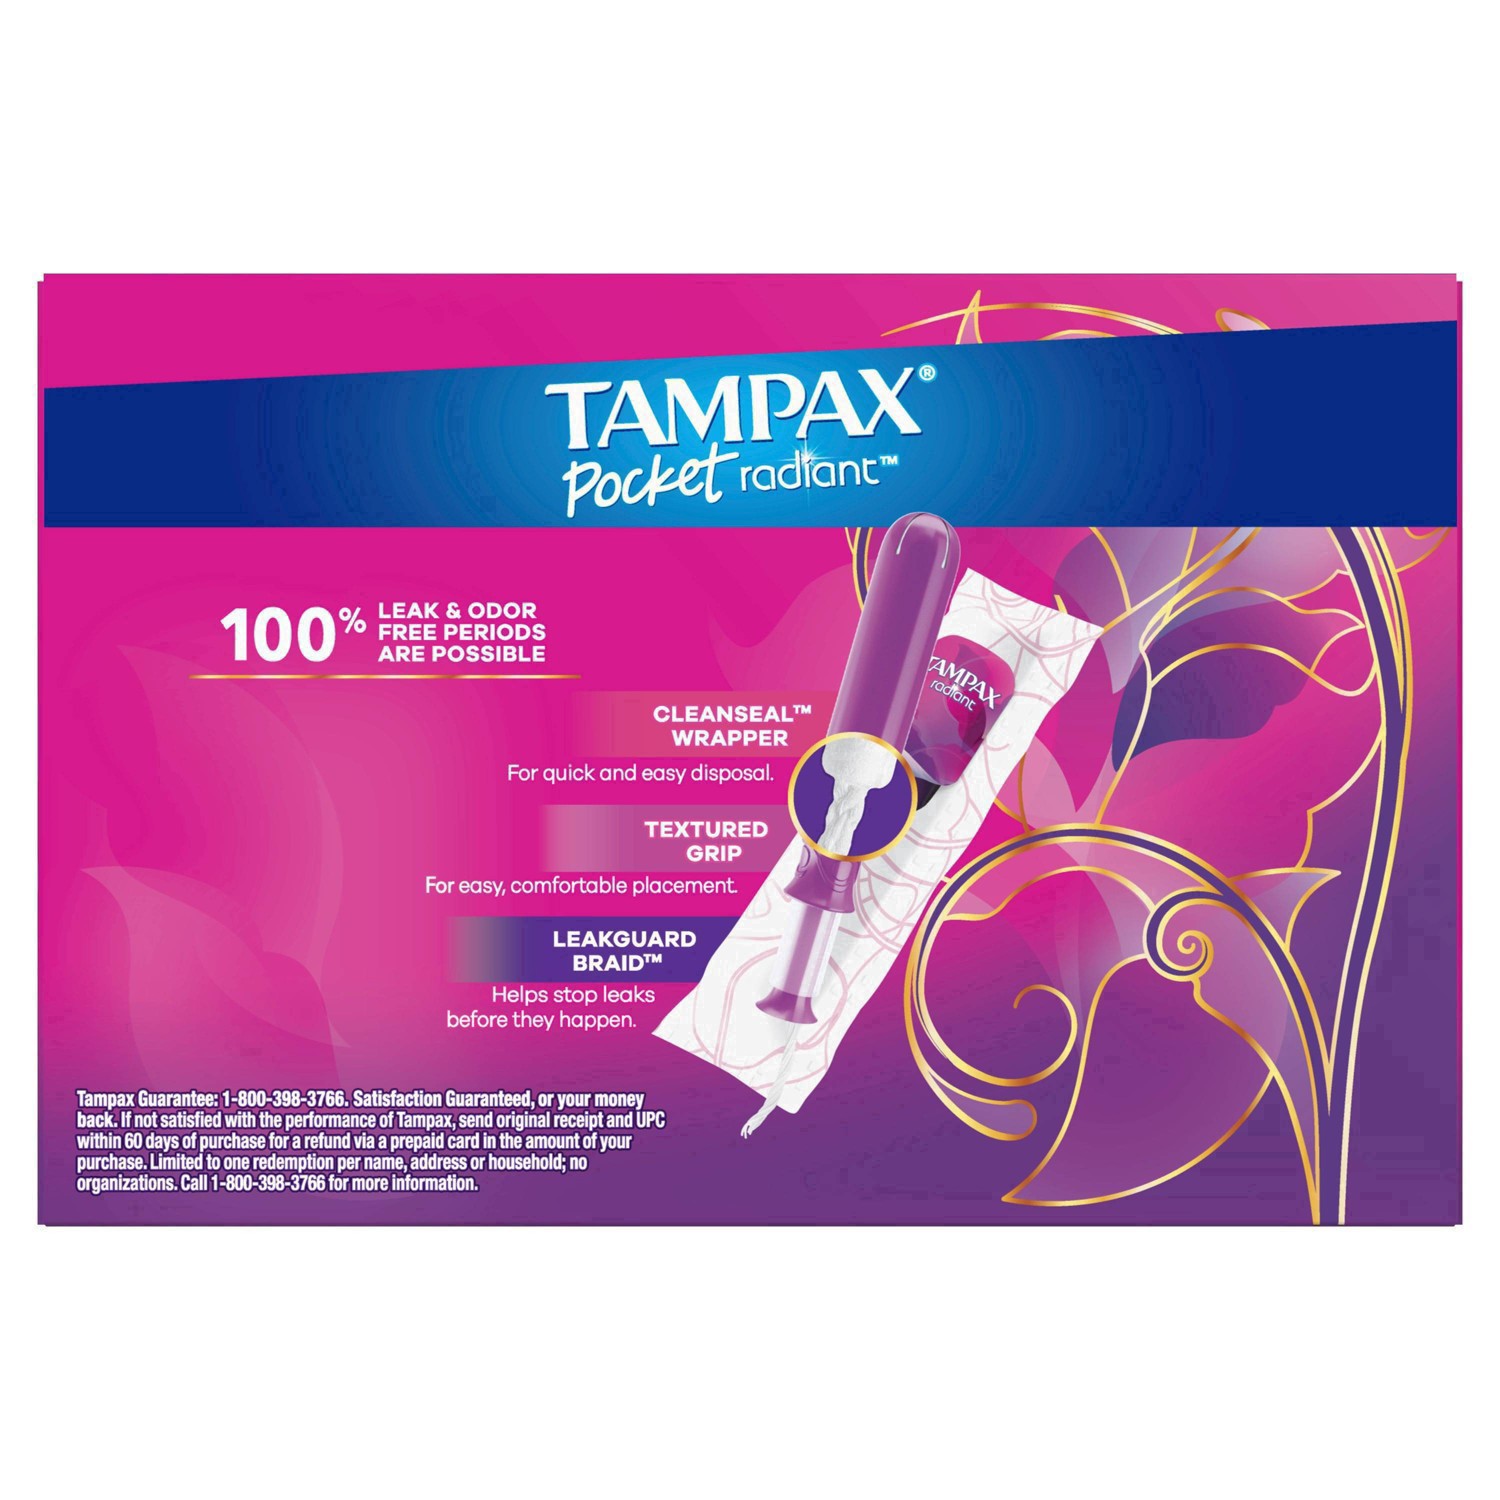 slide 94 of 94, Tampax Pocket Radiant Compact Plastic Tampons, With LeakGuard Braid, Super Absorbency, Unscented, 28 Count, 28 ct